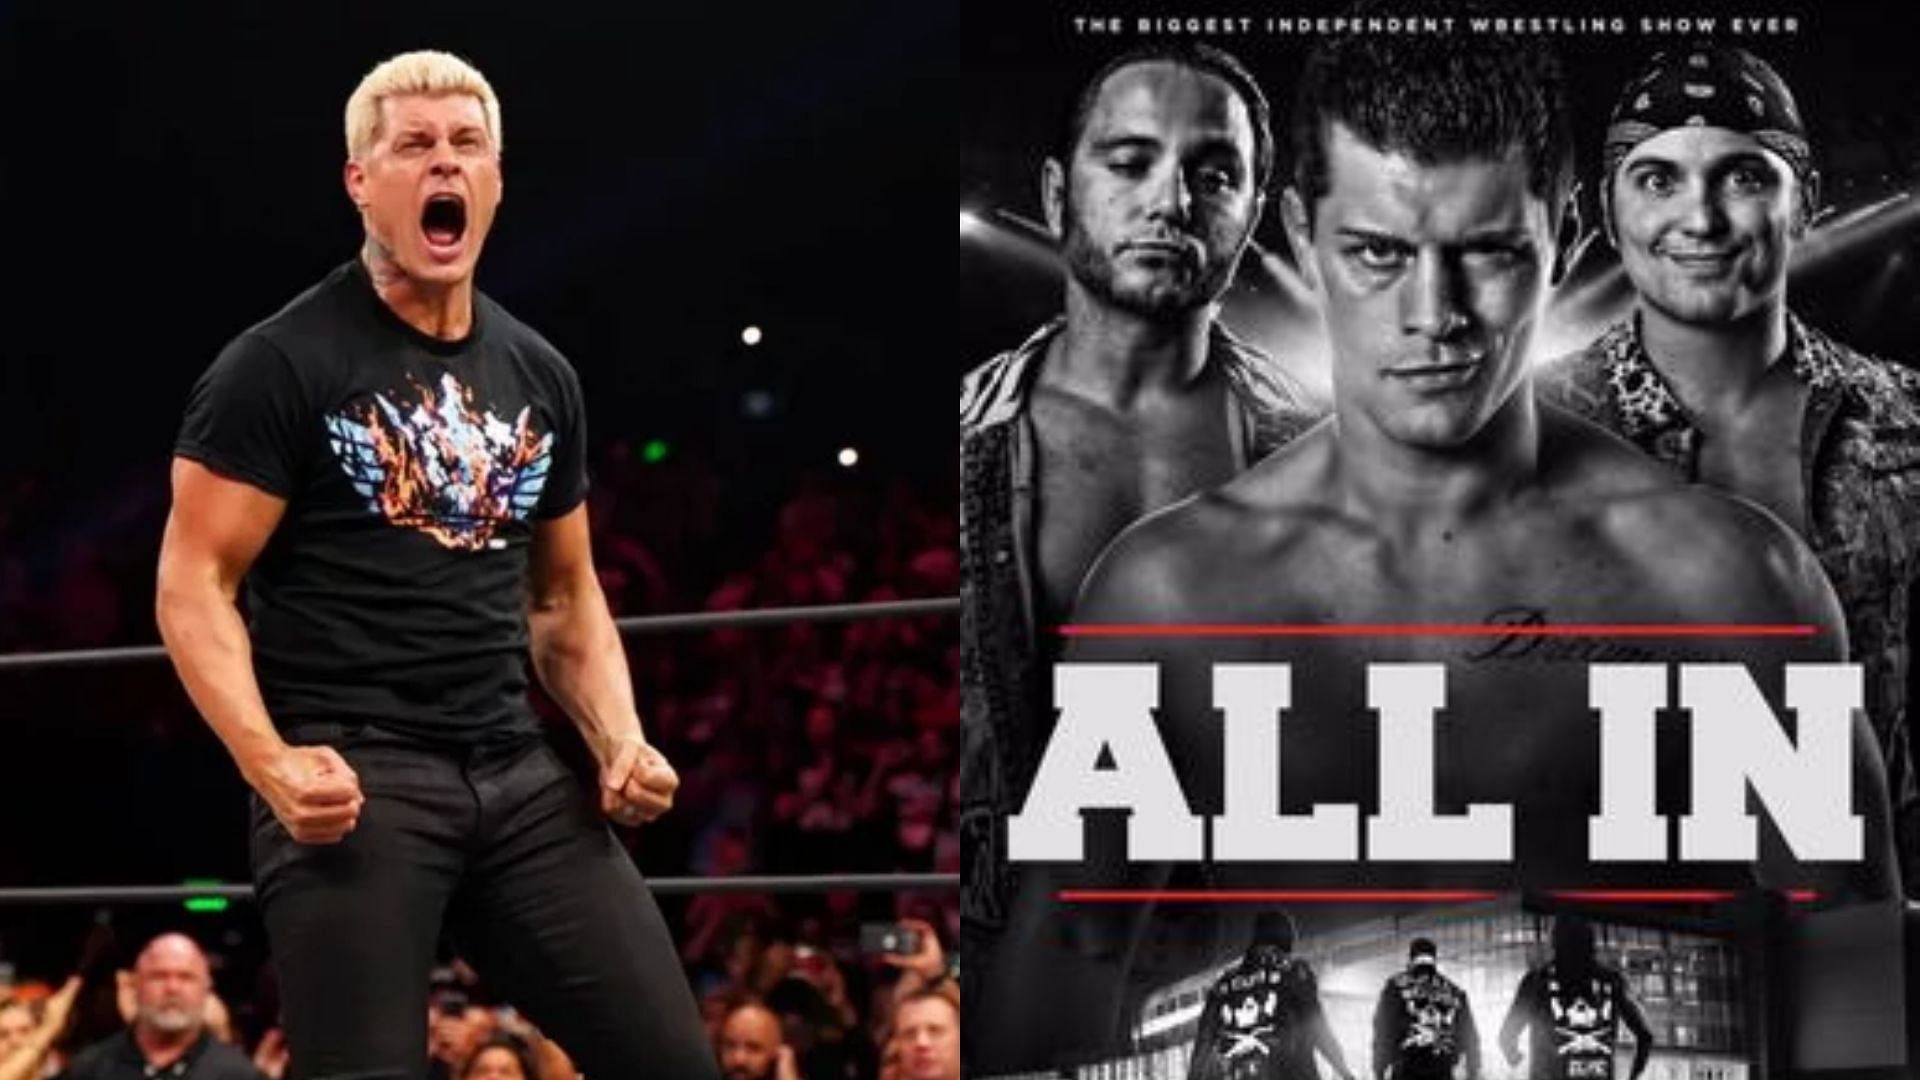 Cody Rhodes and Young Bucks organised the biggest Independent Wrestling Show, All In, in 2018